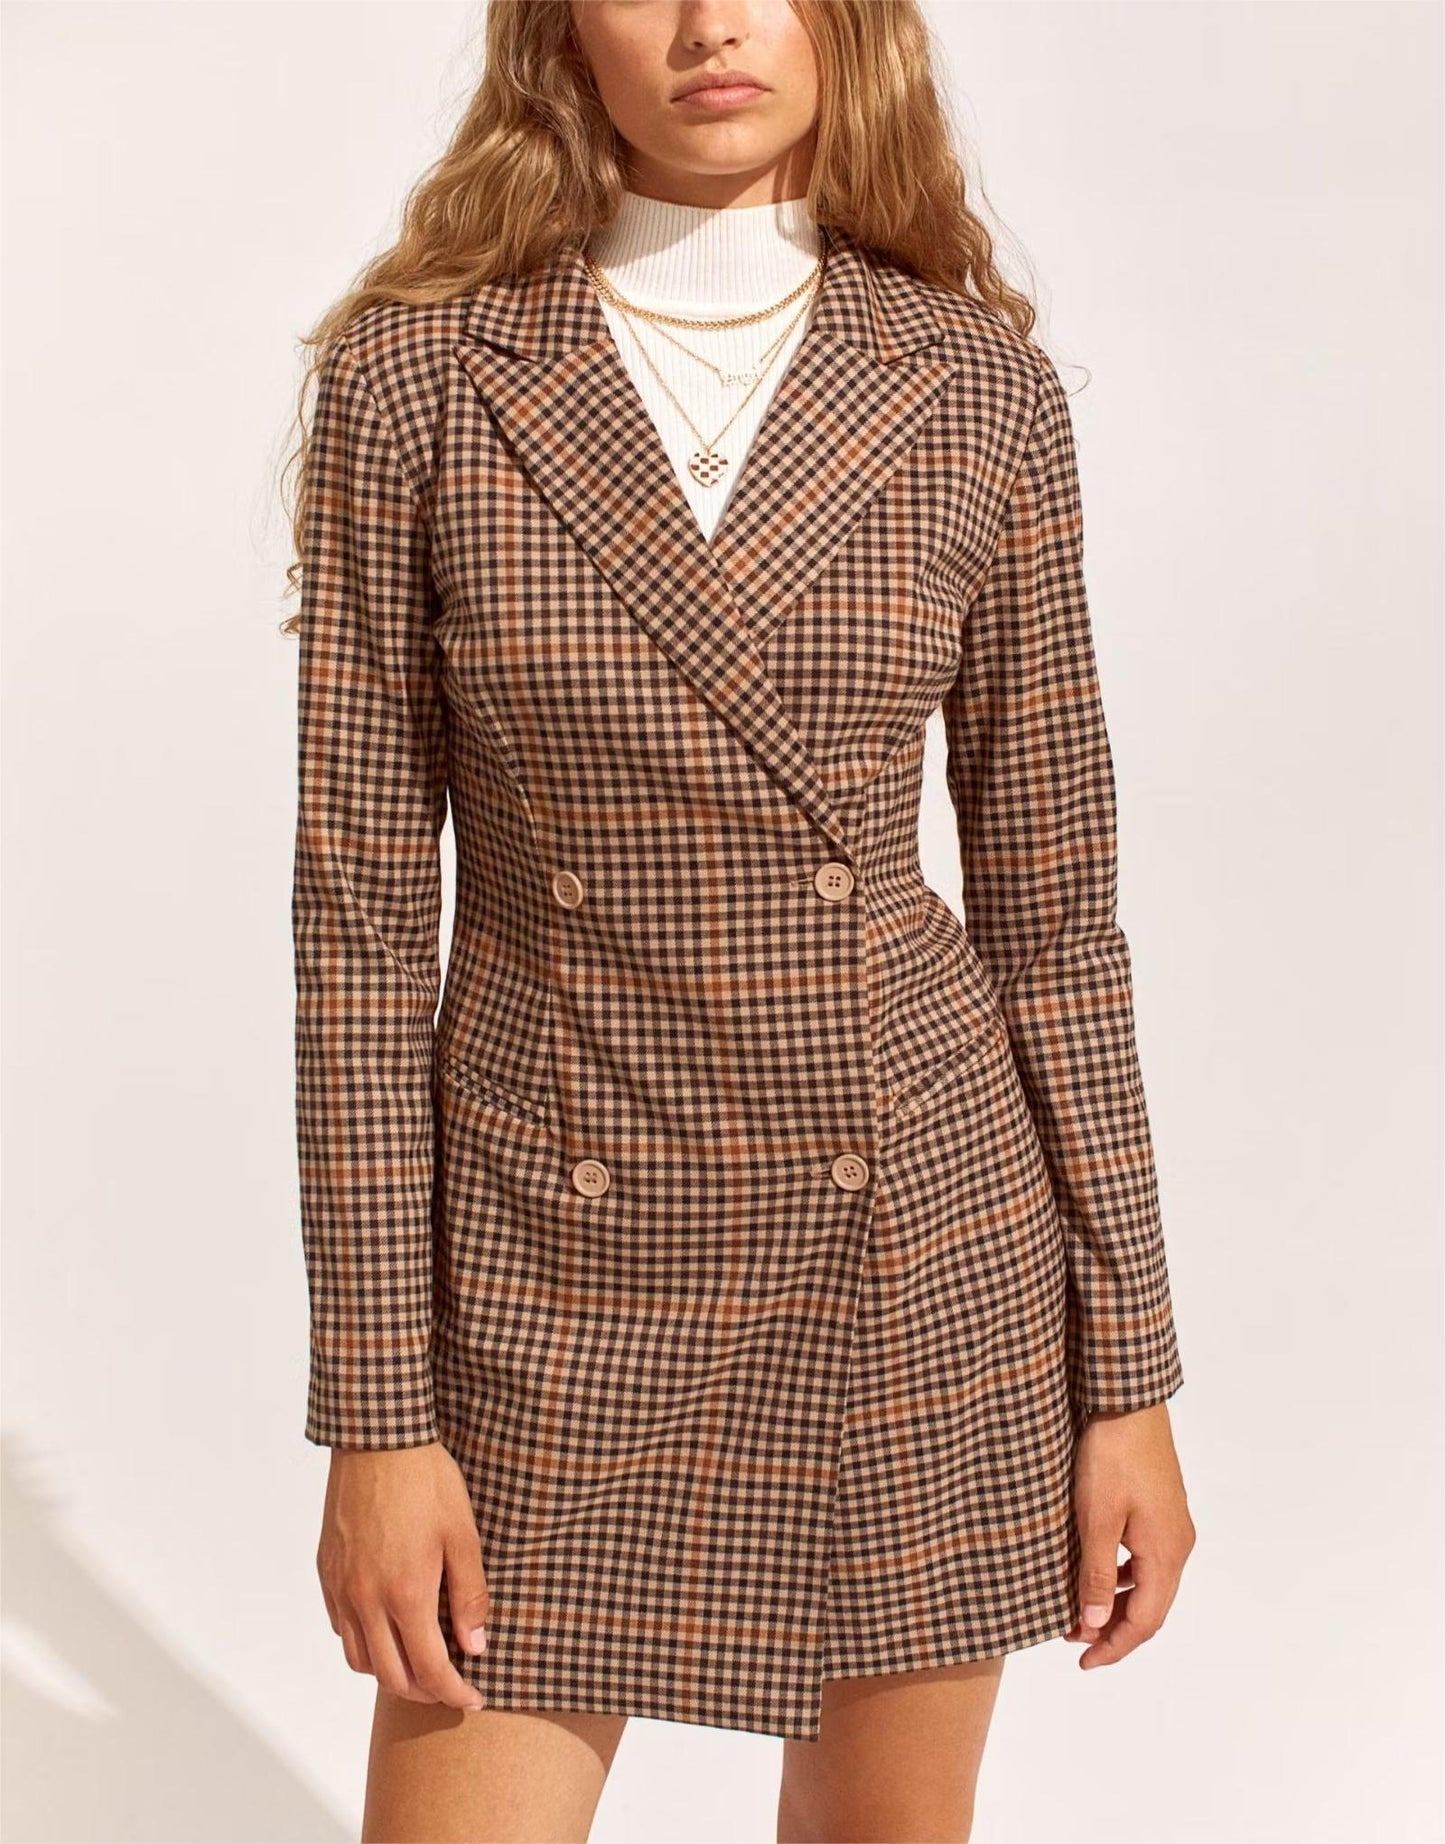 Sophisticated and Chic: Double Breasted Collared Long Sleeve Blazer Dress - ForVanity dress, Office Dress Office Dress